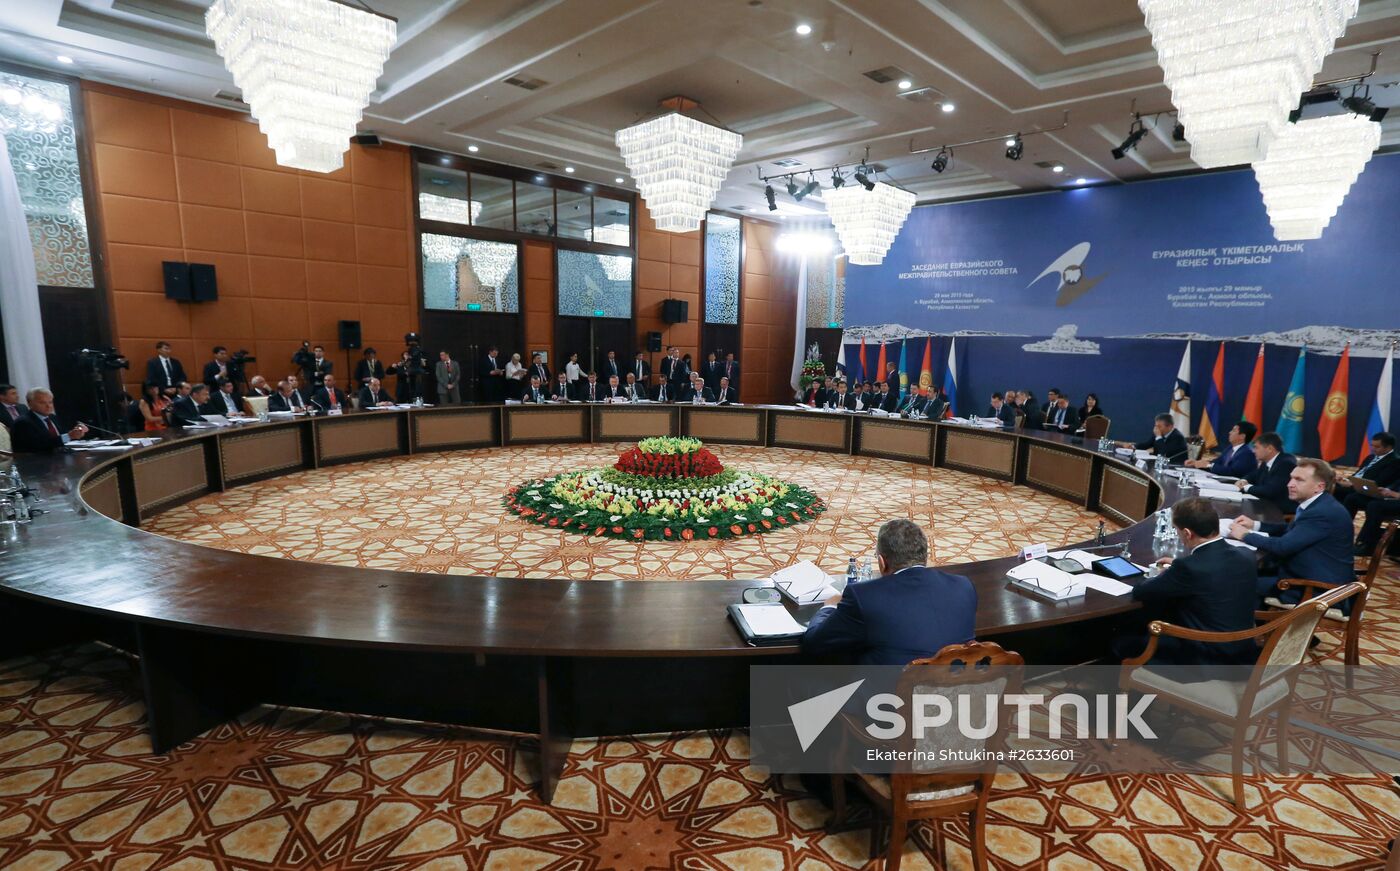 Prime Minister Dmitry Medvedev takes part in meeting of CIS and EAEC heads of governments in Kazakhstan